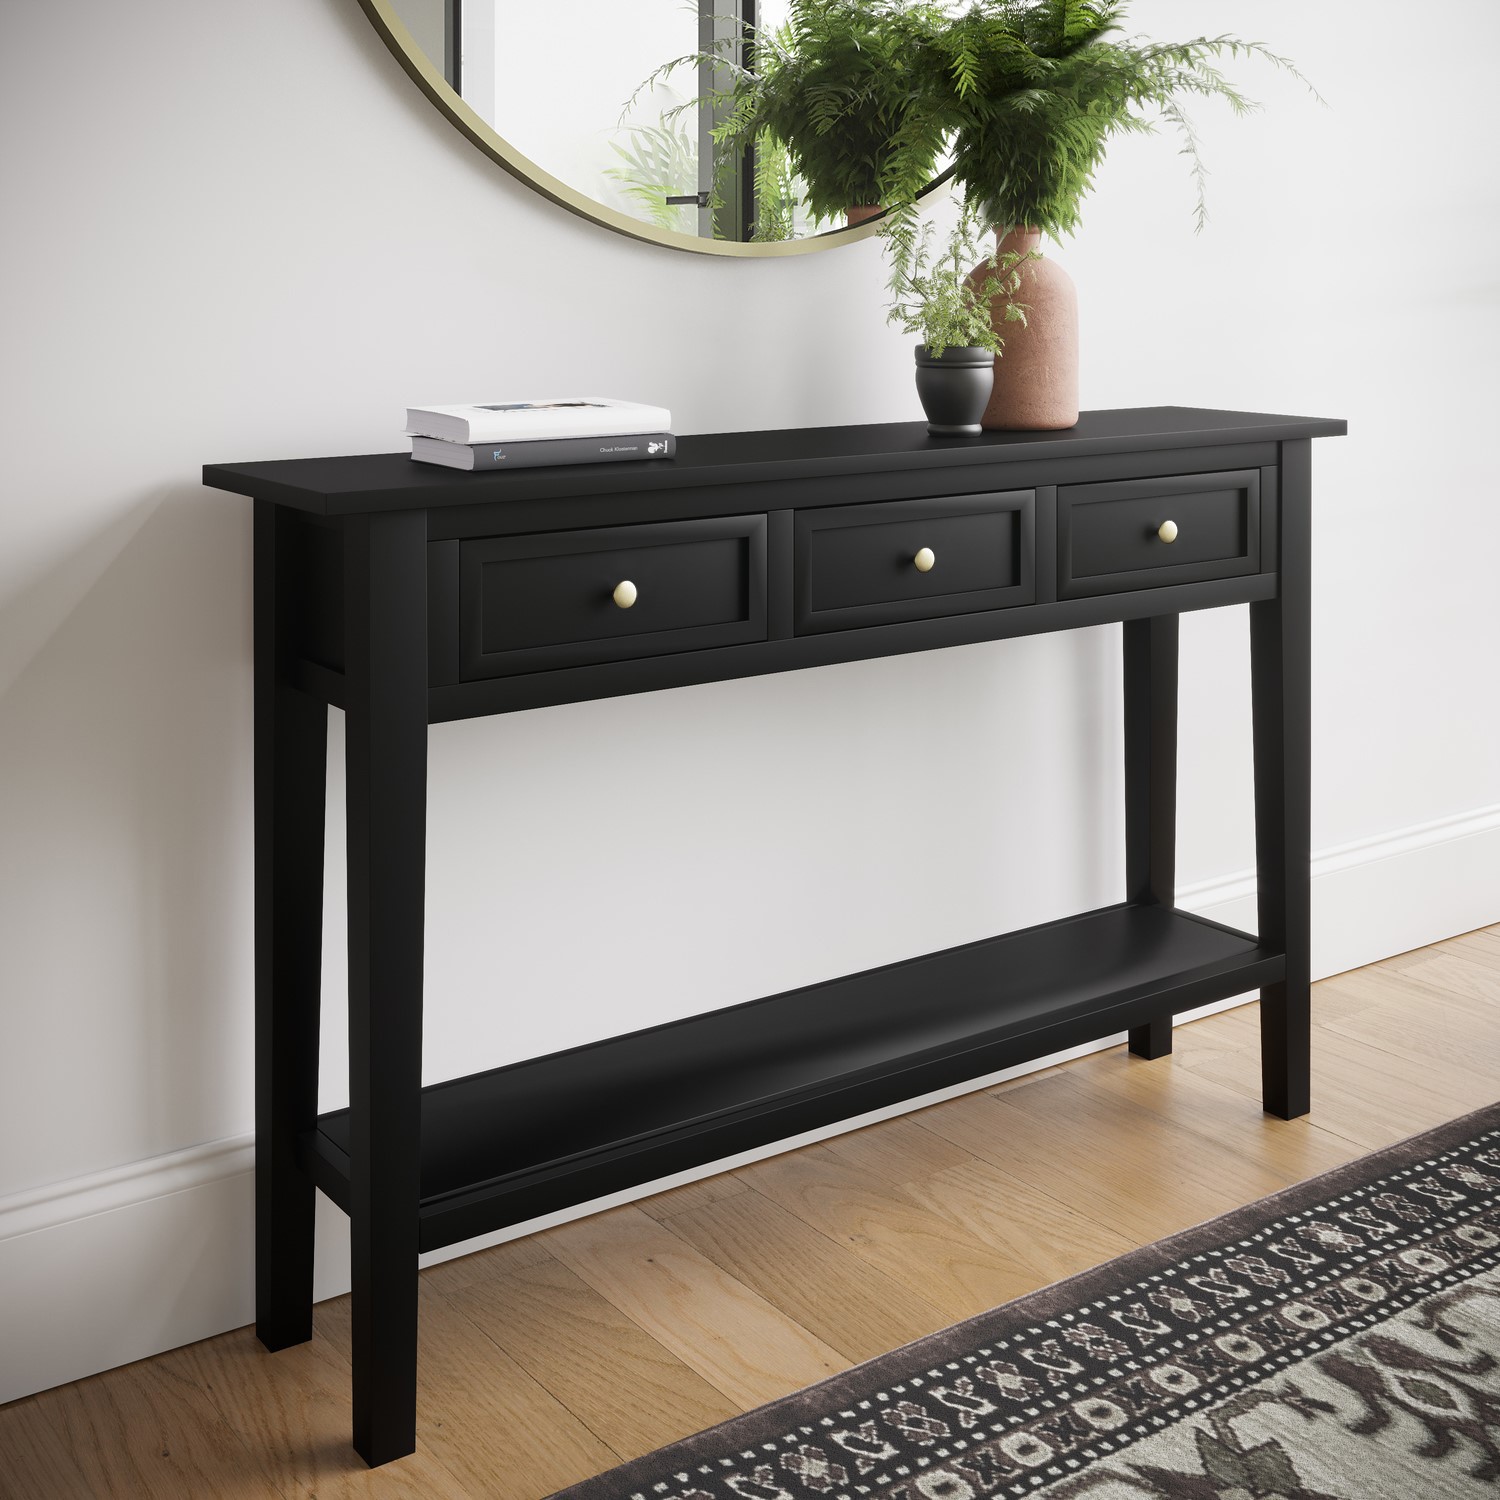 Photo of Large narrow black wood console table with drawers - elms